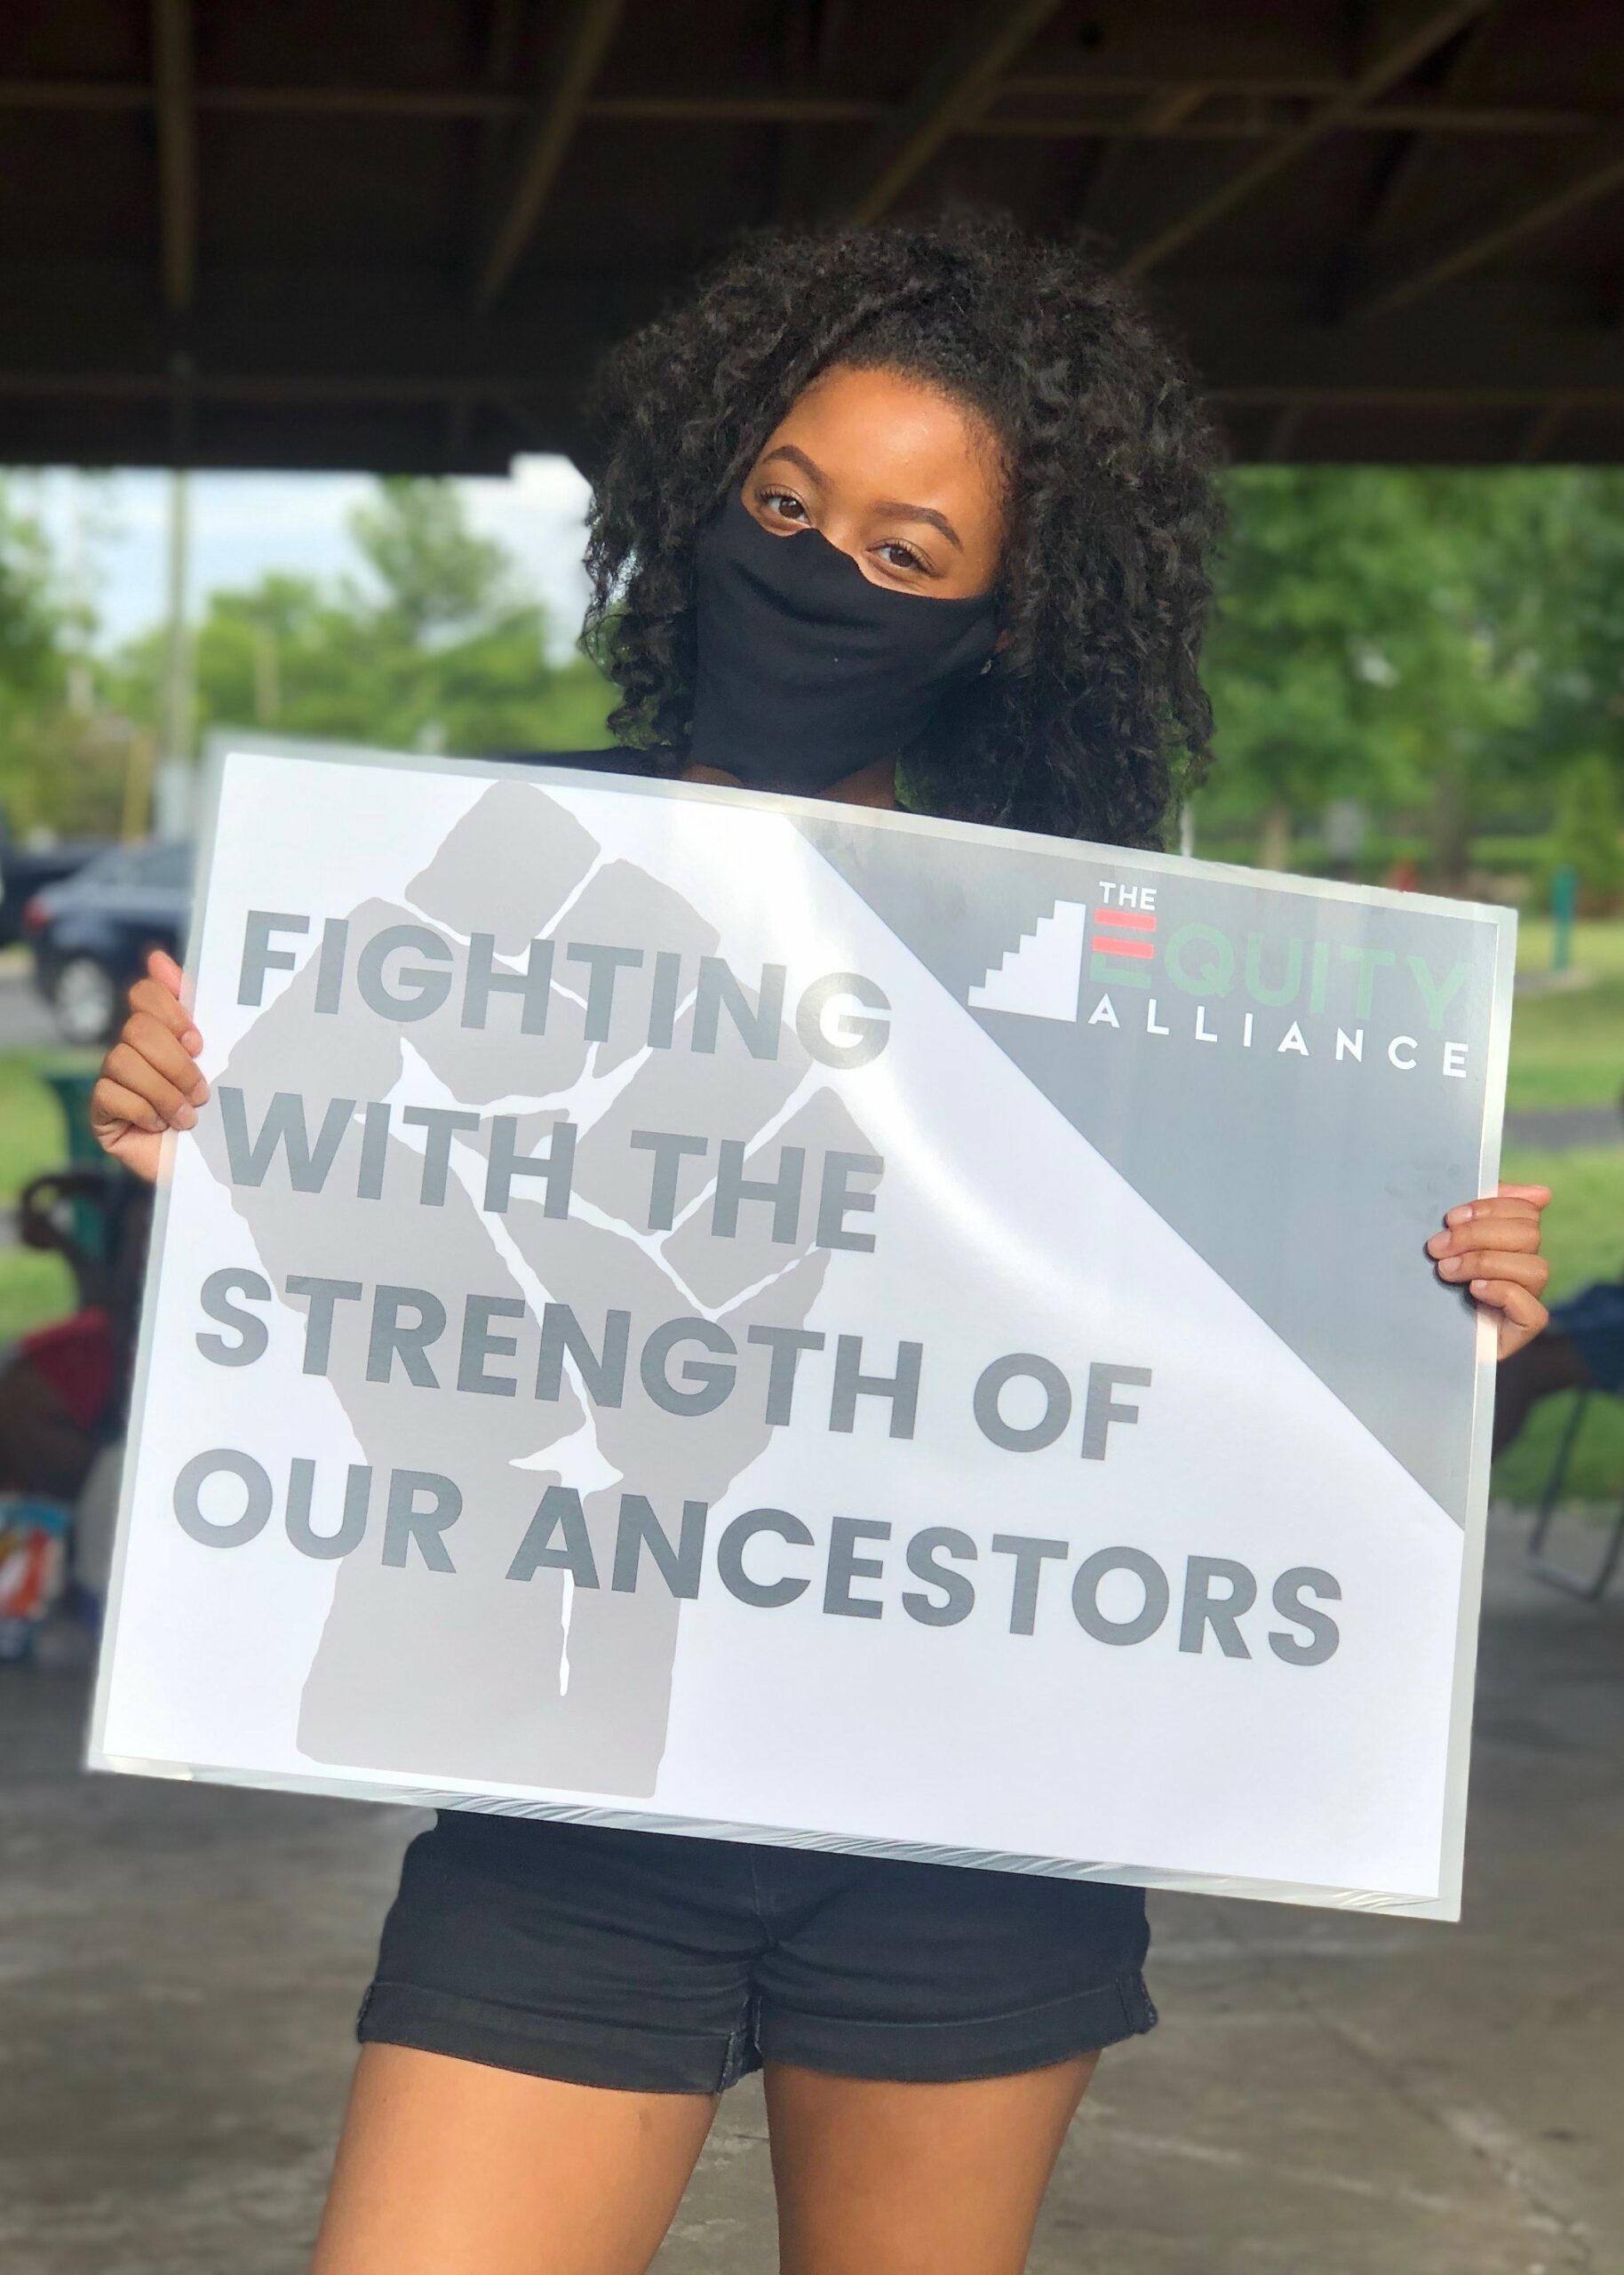 Youth at TEA voter mobilization action (Fall 2020). Credit: The Equity Alliance (TEA).